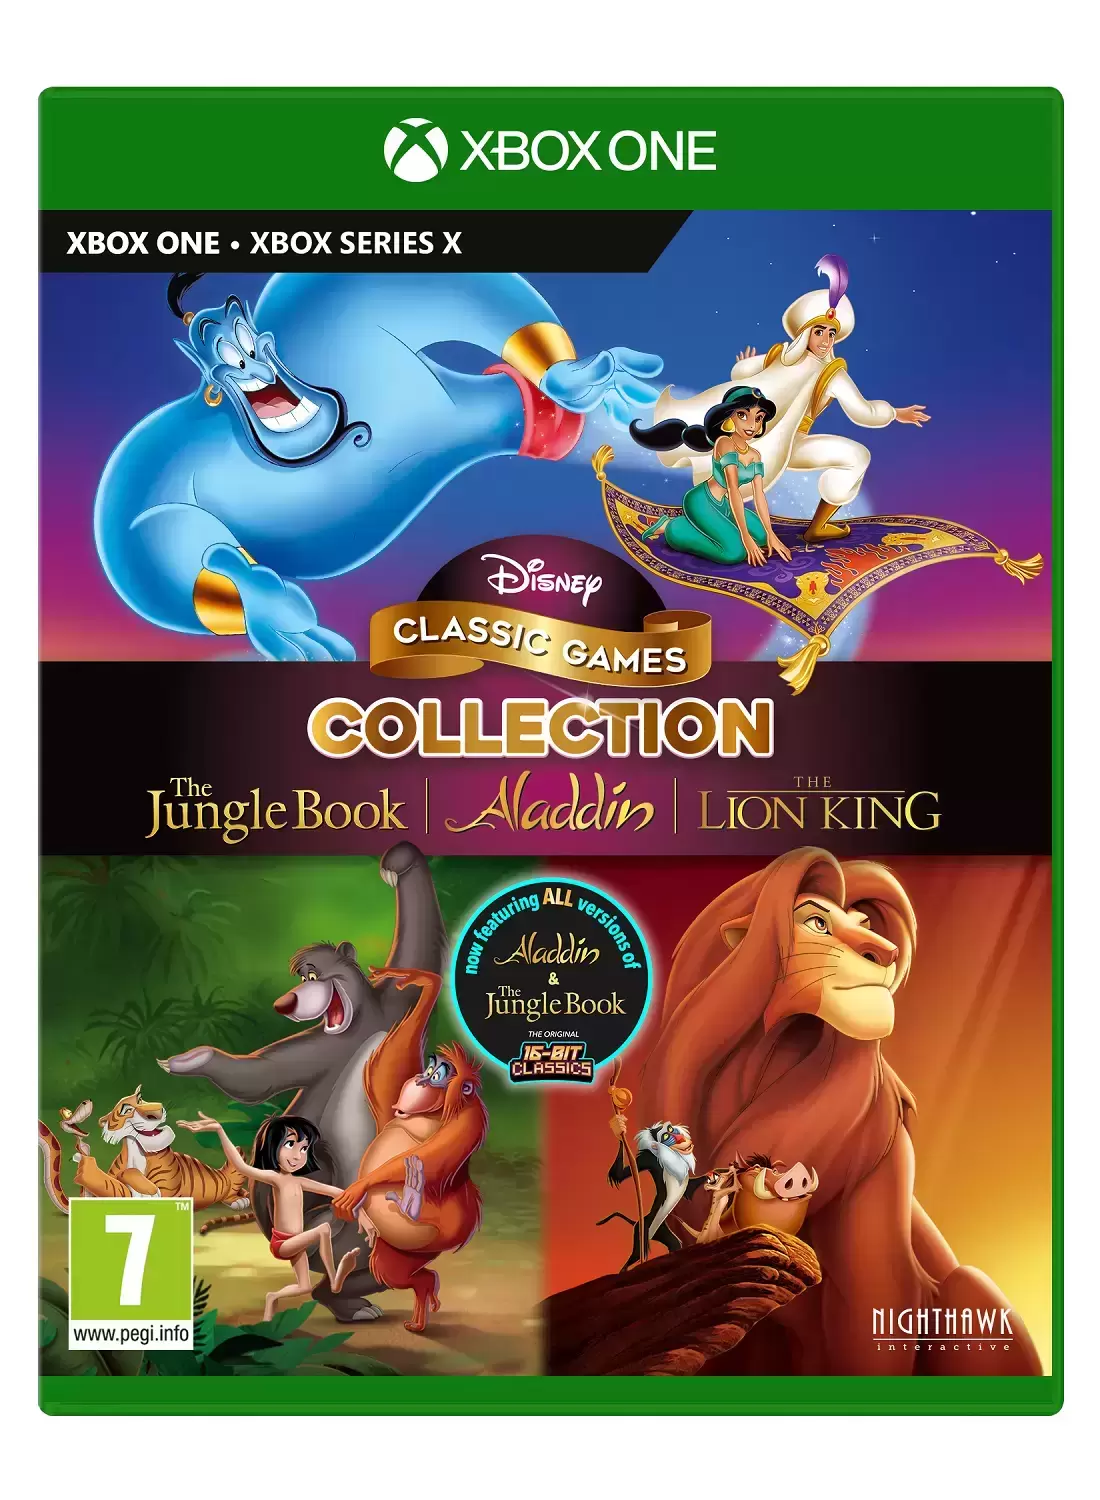 XBOX One Games - Disney Classic Games Collection